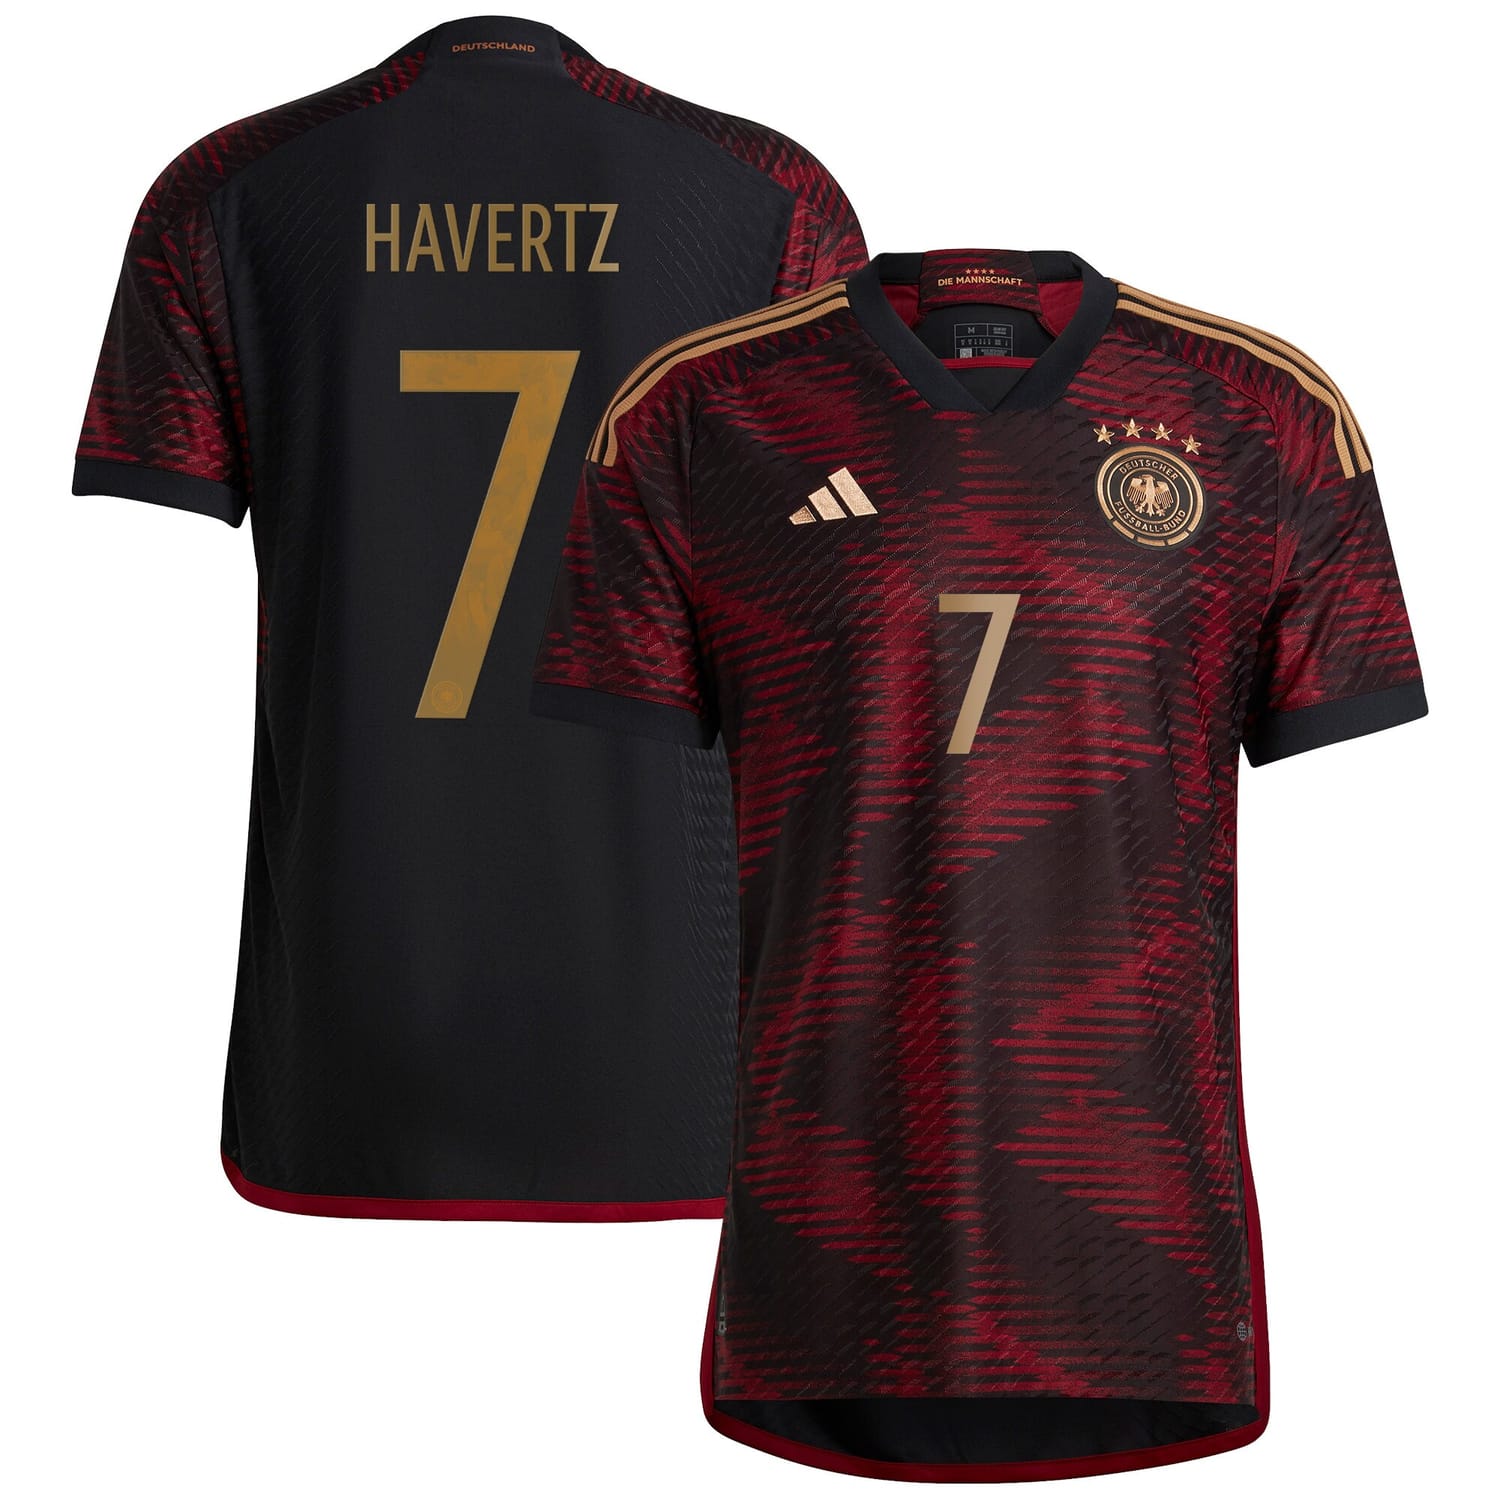 Germany National Team Away Authentic Jersey Shirt player Kai Havertz 7 printing for Men